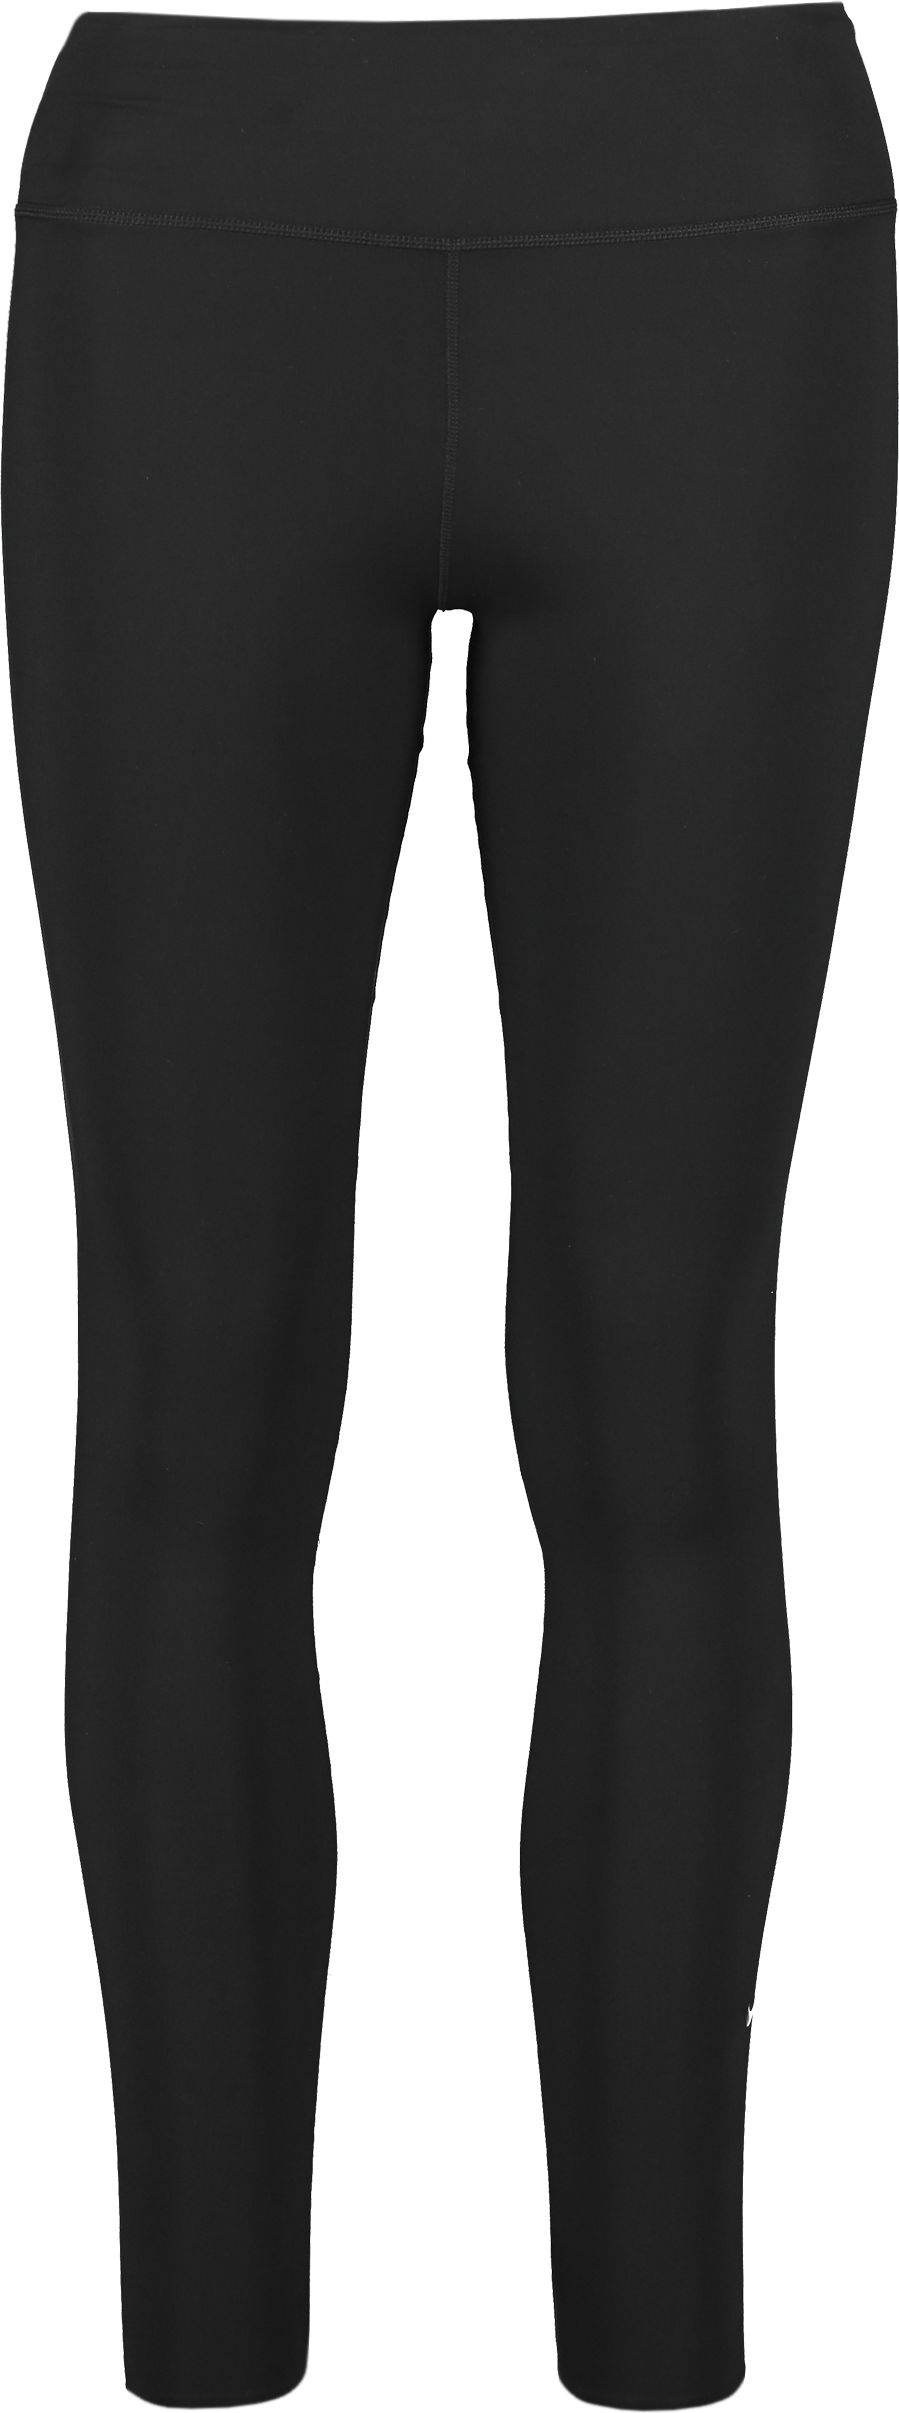 NIKE, W ALL-IN LUX TIGHTS